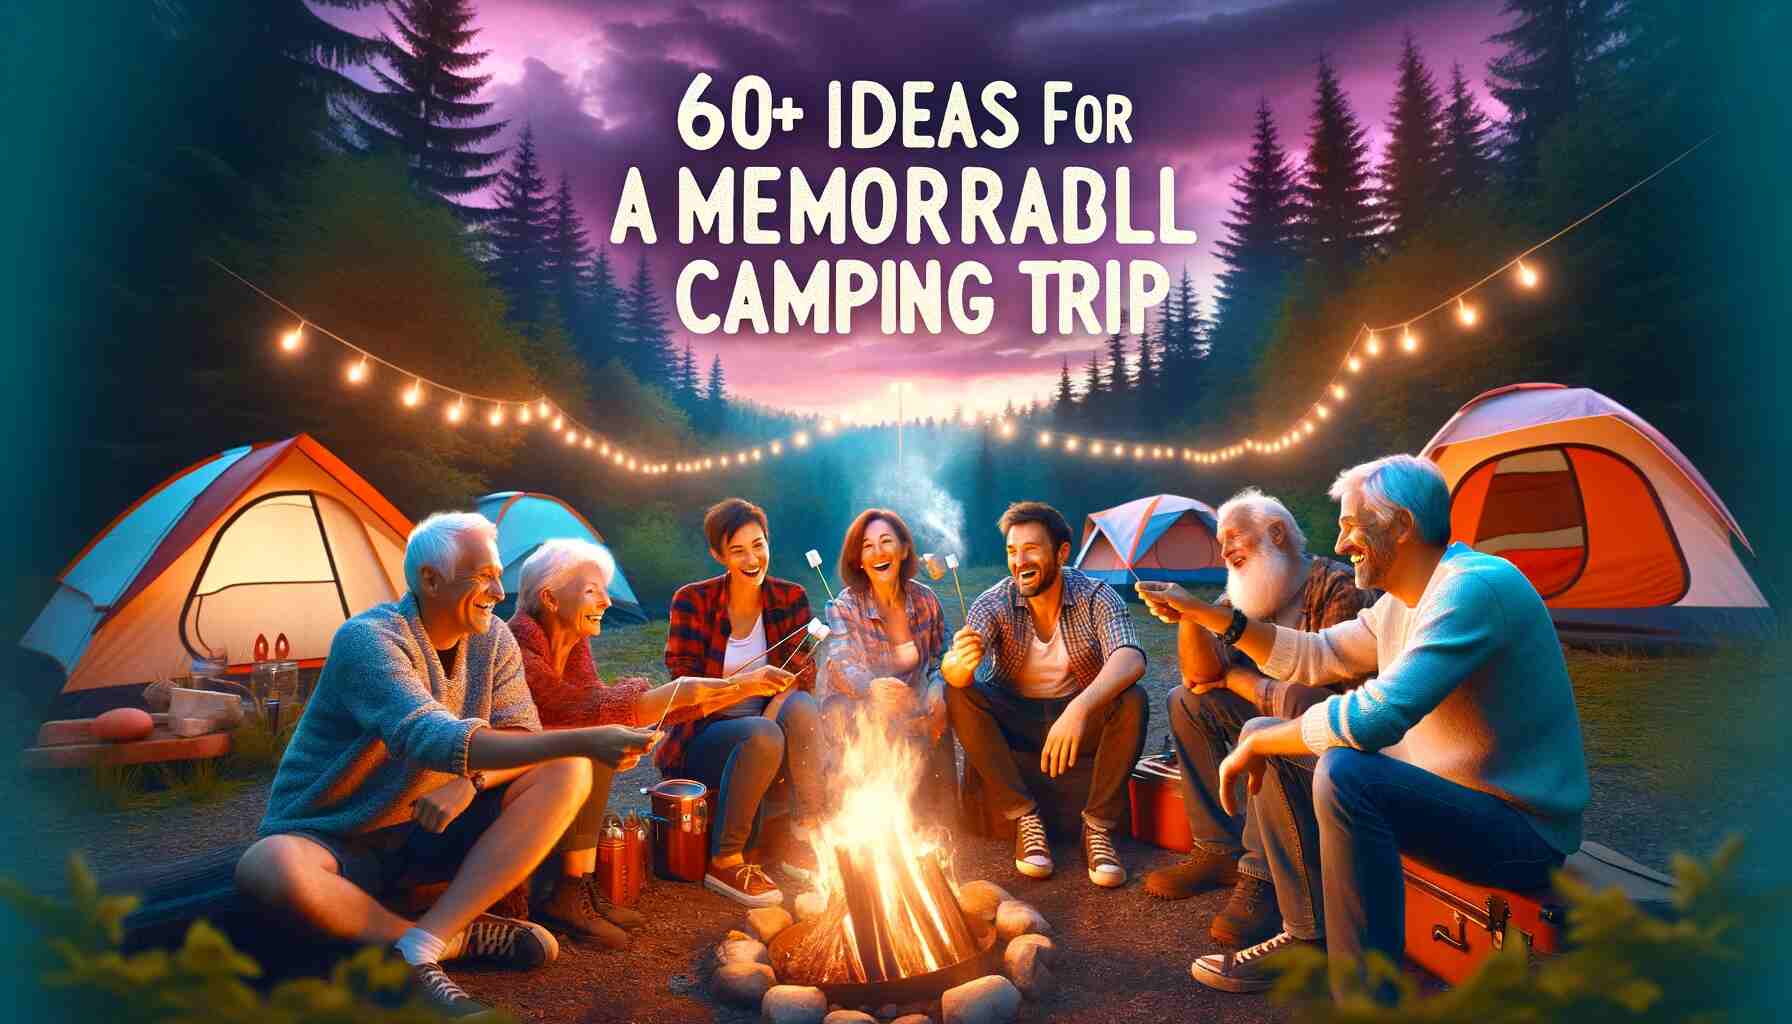 Group of adults gathered around a campfire in a lush forest at dusk, laughing and toasting marshmallows. Camping tents are visible in the background. The scene is warmly lit by the fire, with the evening sky above displaying shades of purple and blue. The image features the text '60+ Ideas for a Memorable Adult Camping Trip' in a stylish, outdoor-themed font at the top.